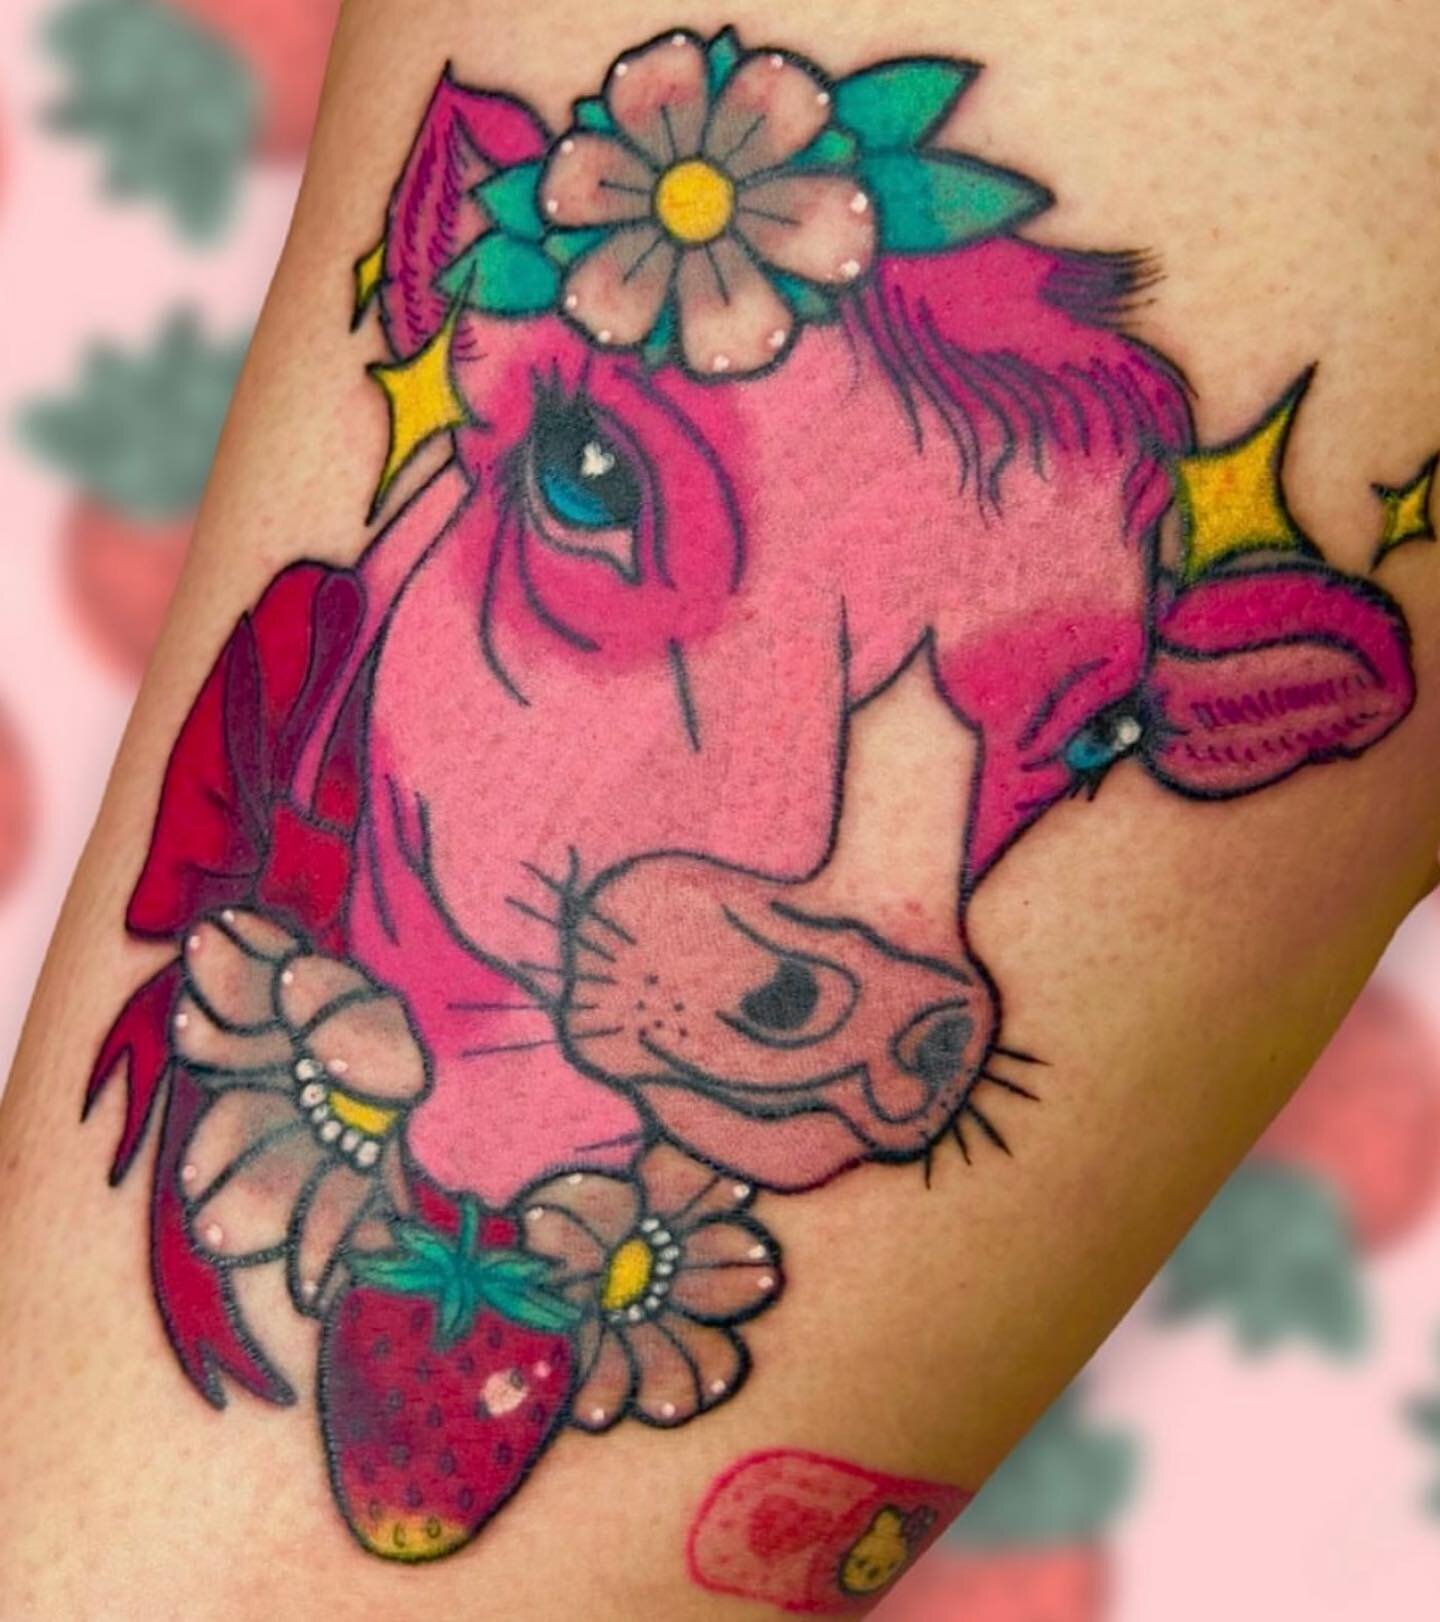 Strawberry Cow done by @eternalwhimsy Send 👉🏼 @eternalwhimsy  a DM for Booking info or Questions.Thanks